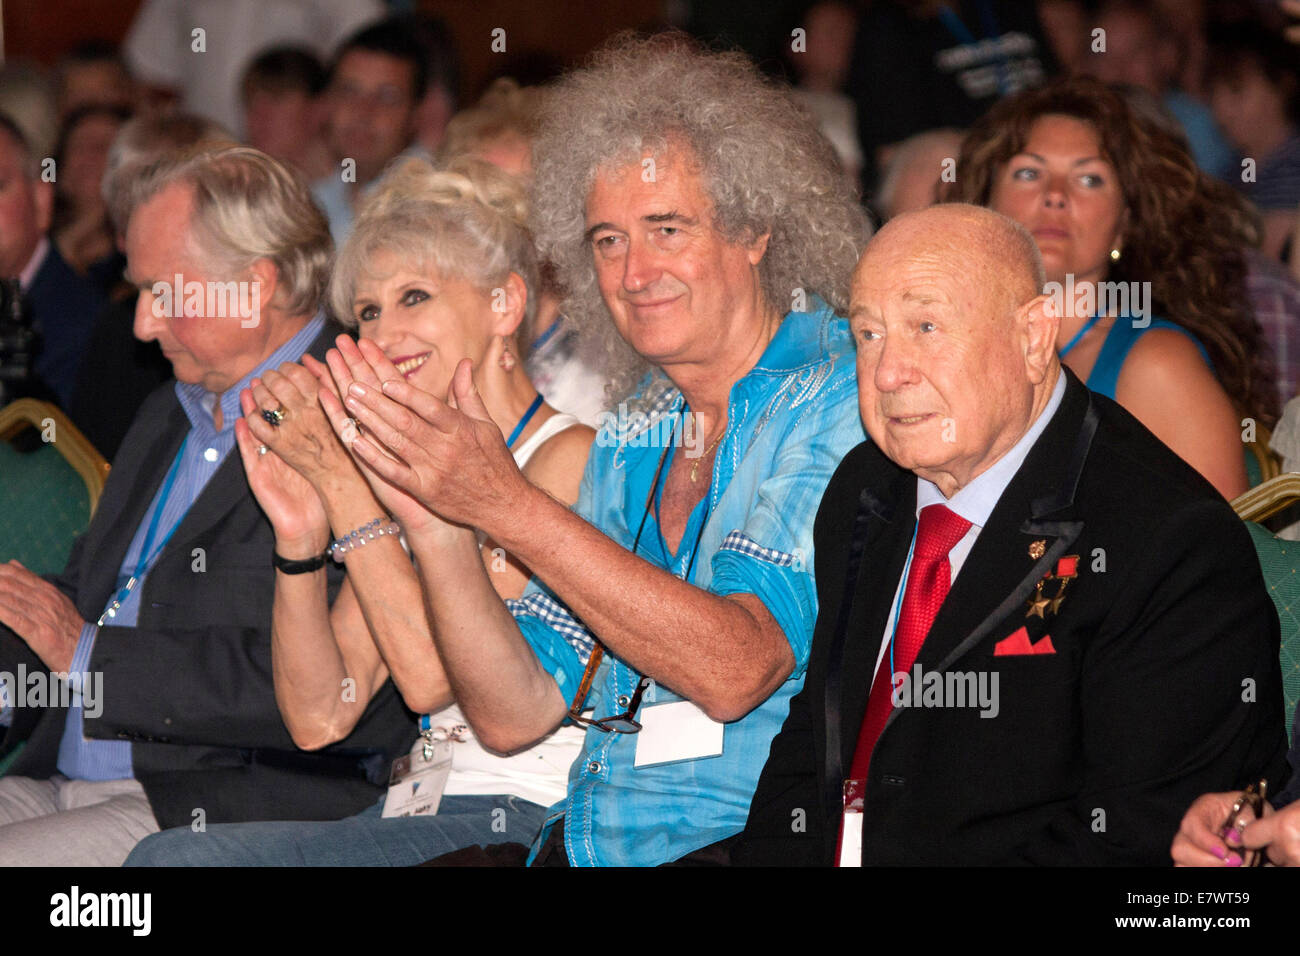 Ethologist Richard Dawkins, ctress Anita Dobson, musician Brian May of Queen and Cosmonaut Alexey Leonov/Alexei Archipowitsch Leonow attending the second editon of the Starmus Festival at the Abama Golf & Spa Resort in Tenerife, Canary Islands on September 22, 2014/picture alliance Stock Photo